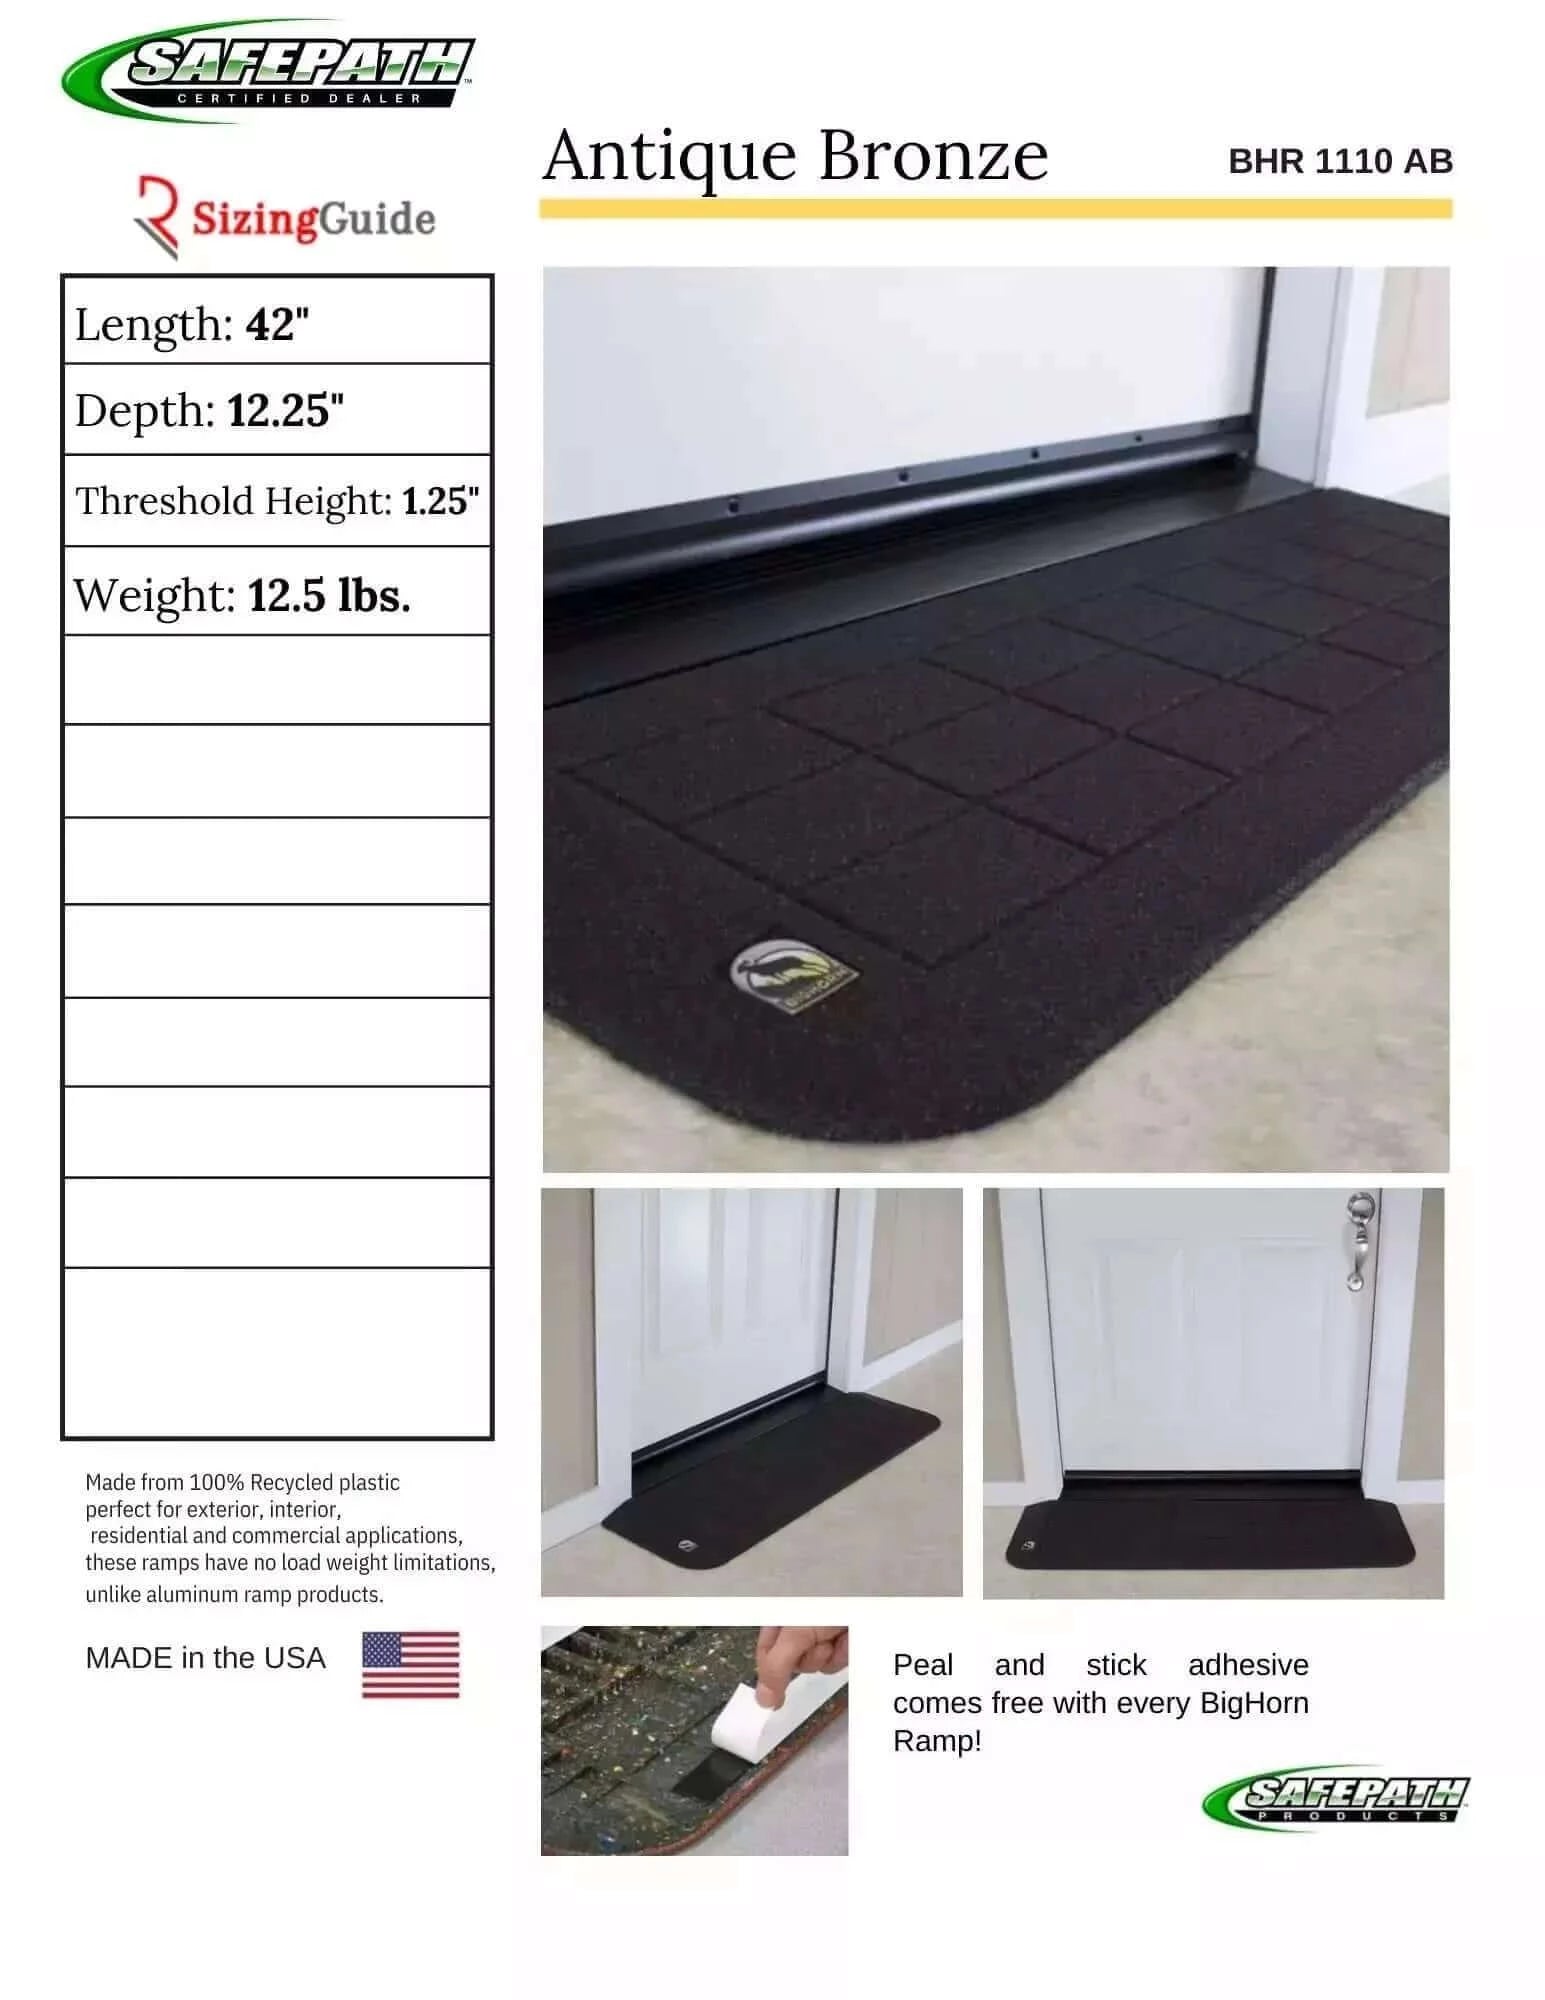 Bighorn Threshold Ramp Reliable Ramps Safepath Antique Bronze specifications